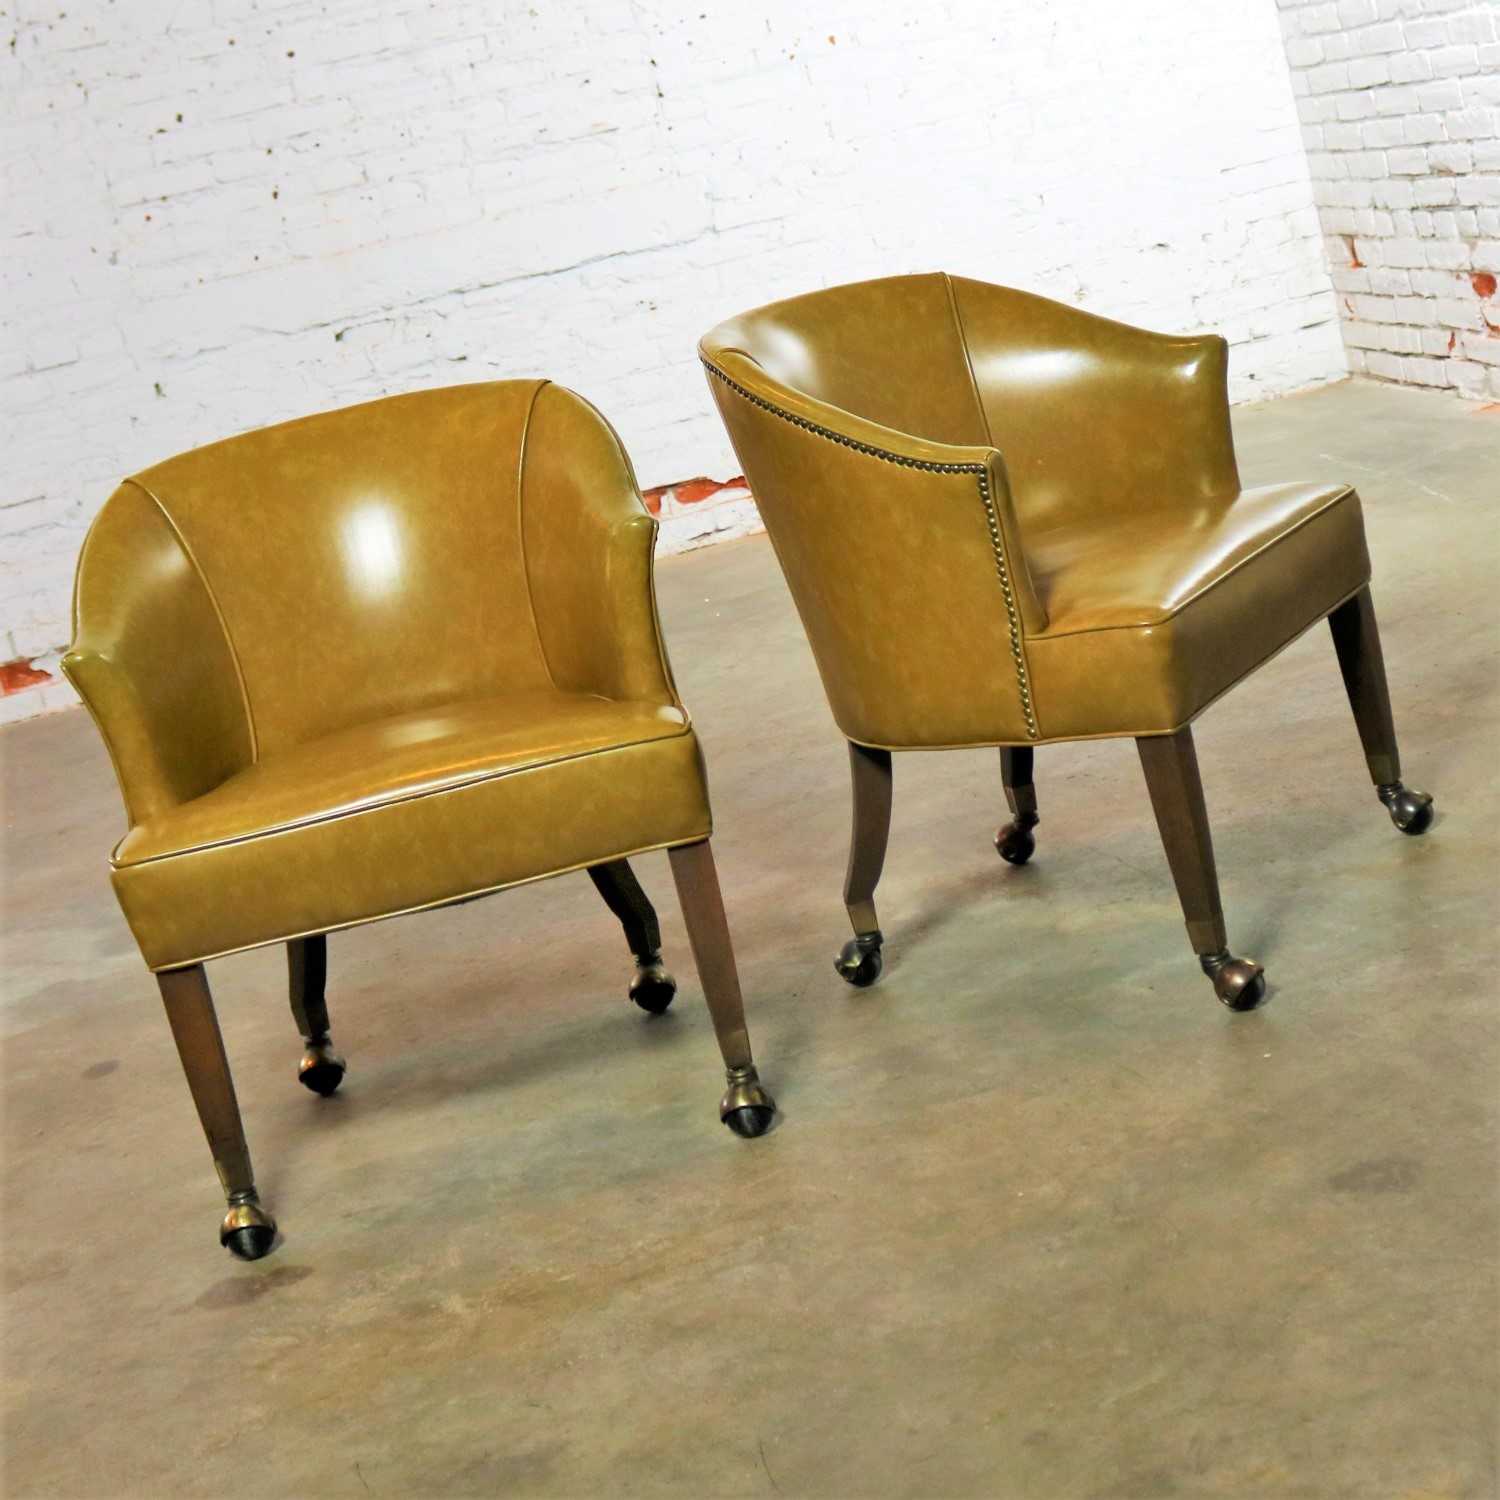 Pair of Mid Century Naugahyde Olive Green Rolling Barrel Chairs with Nail Head Accent